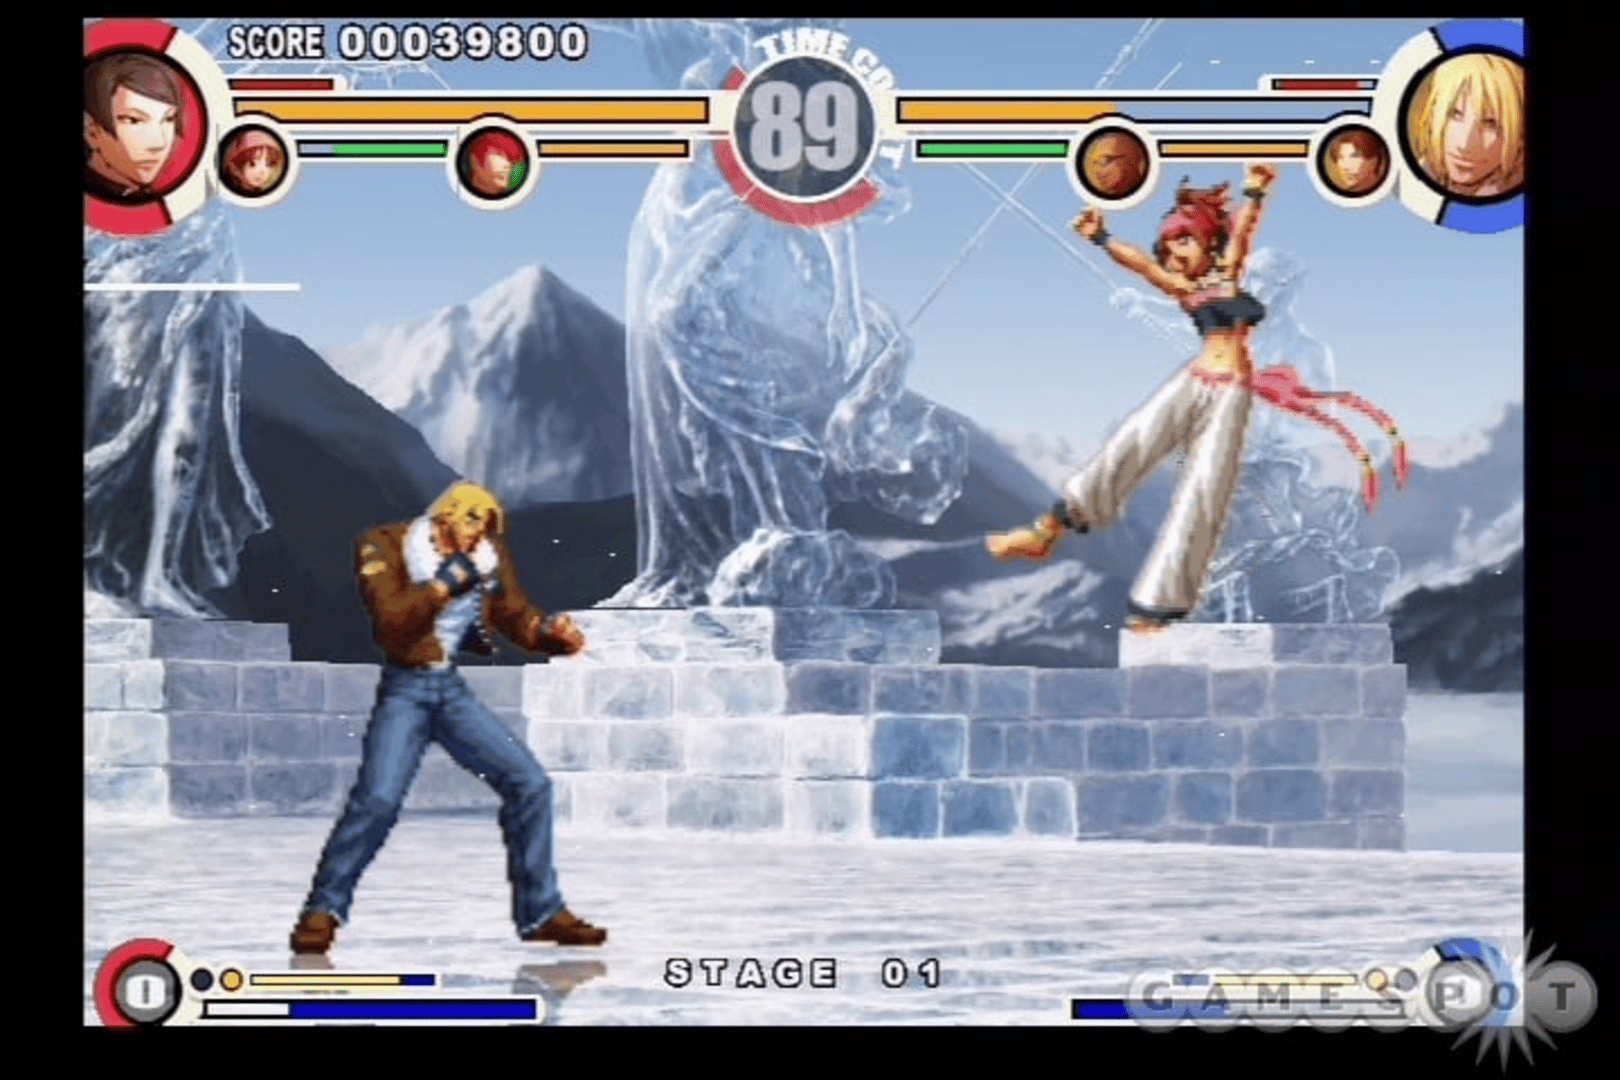 The King of Fighters XI screenshot